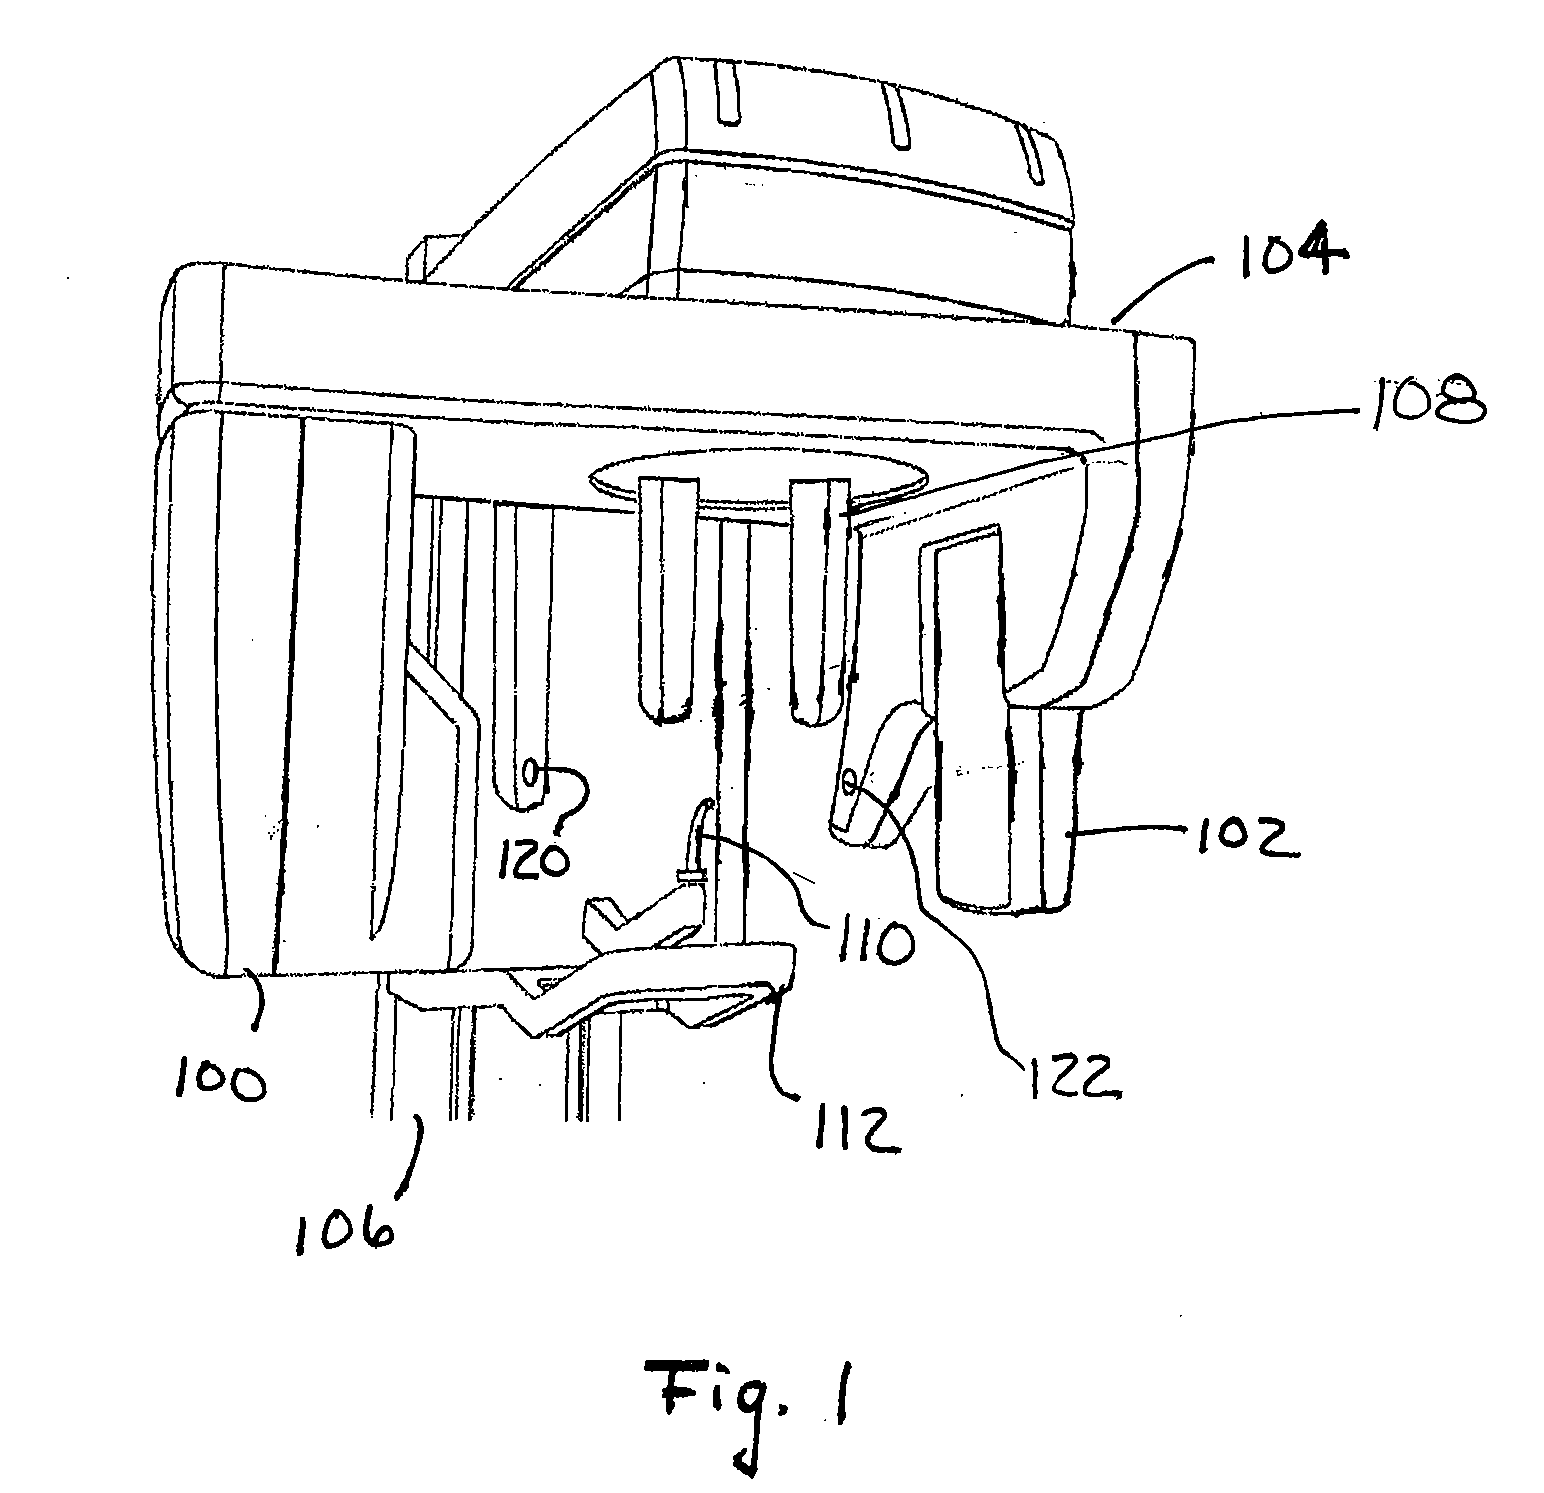 Dental x-ray apparatus and method of positioning a patient therein